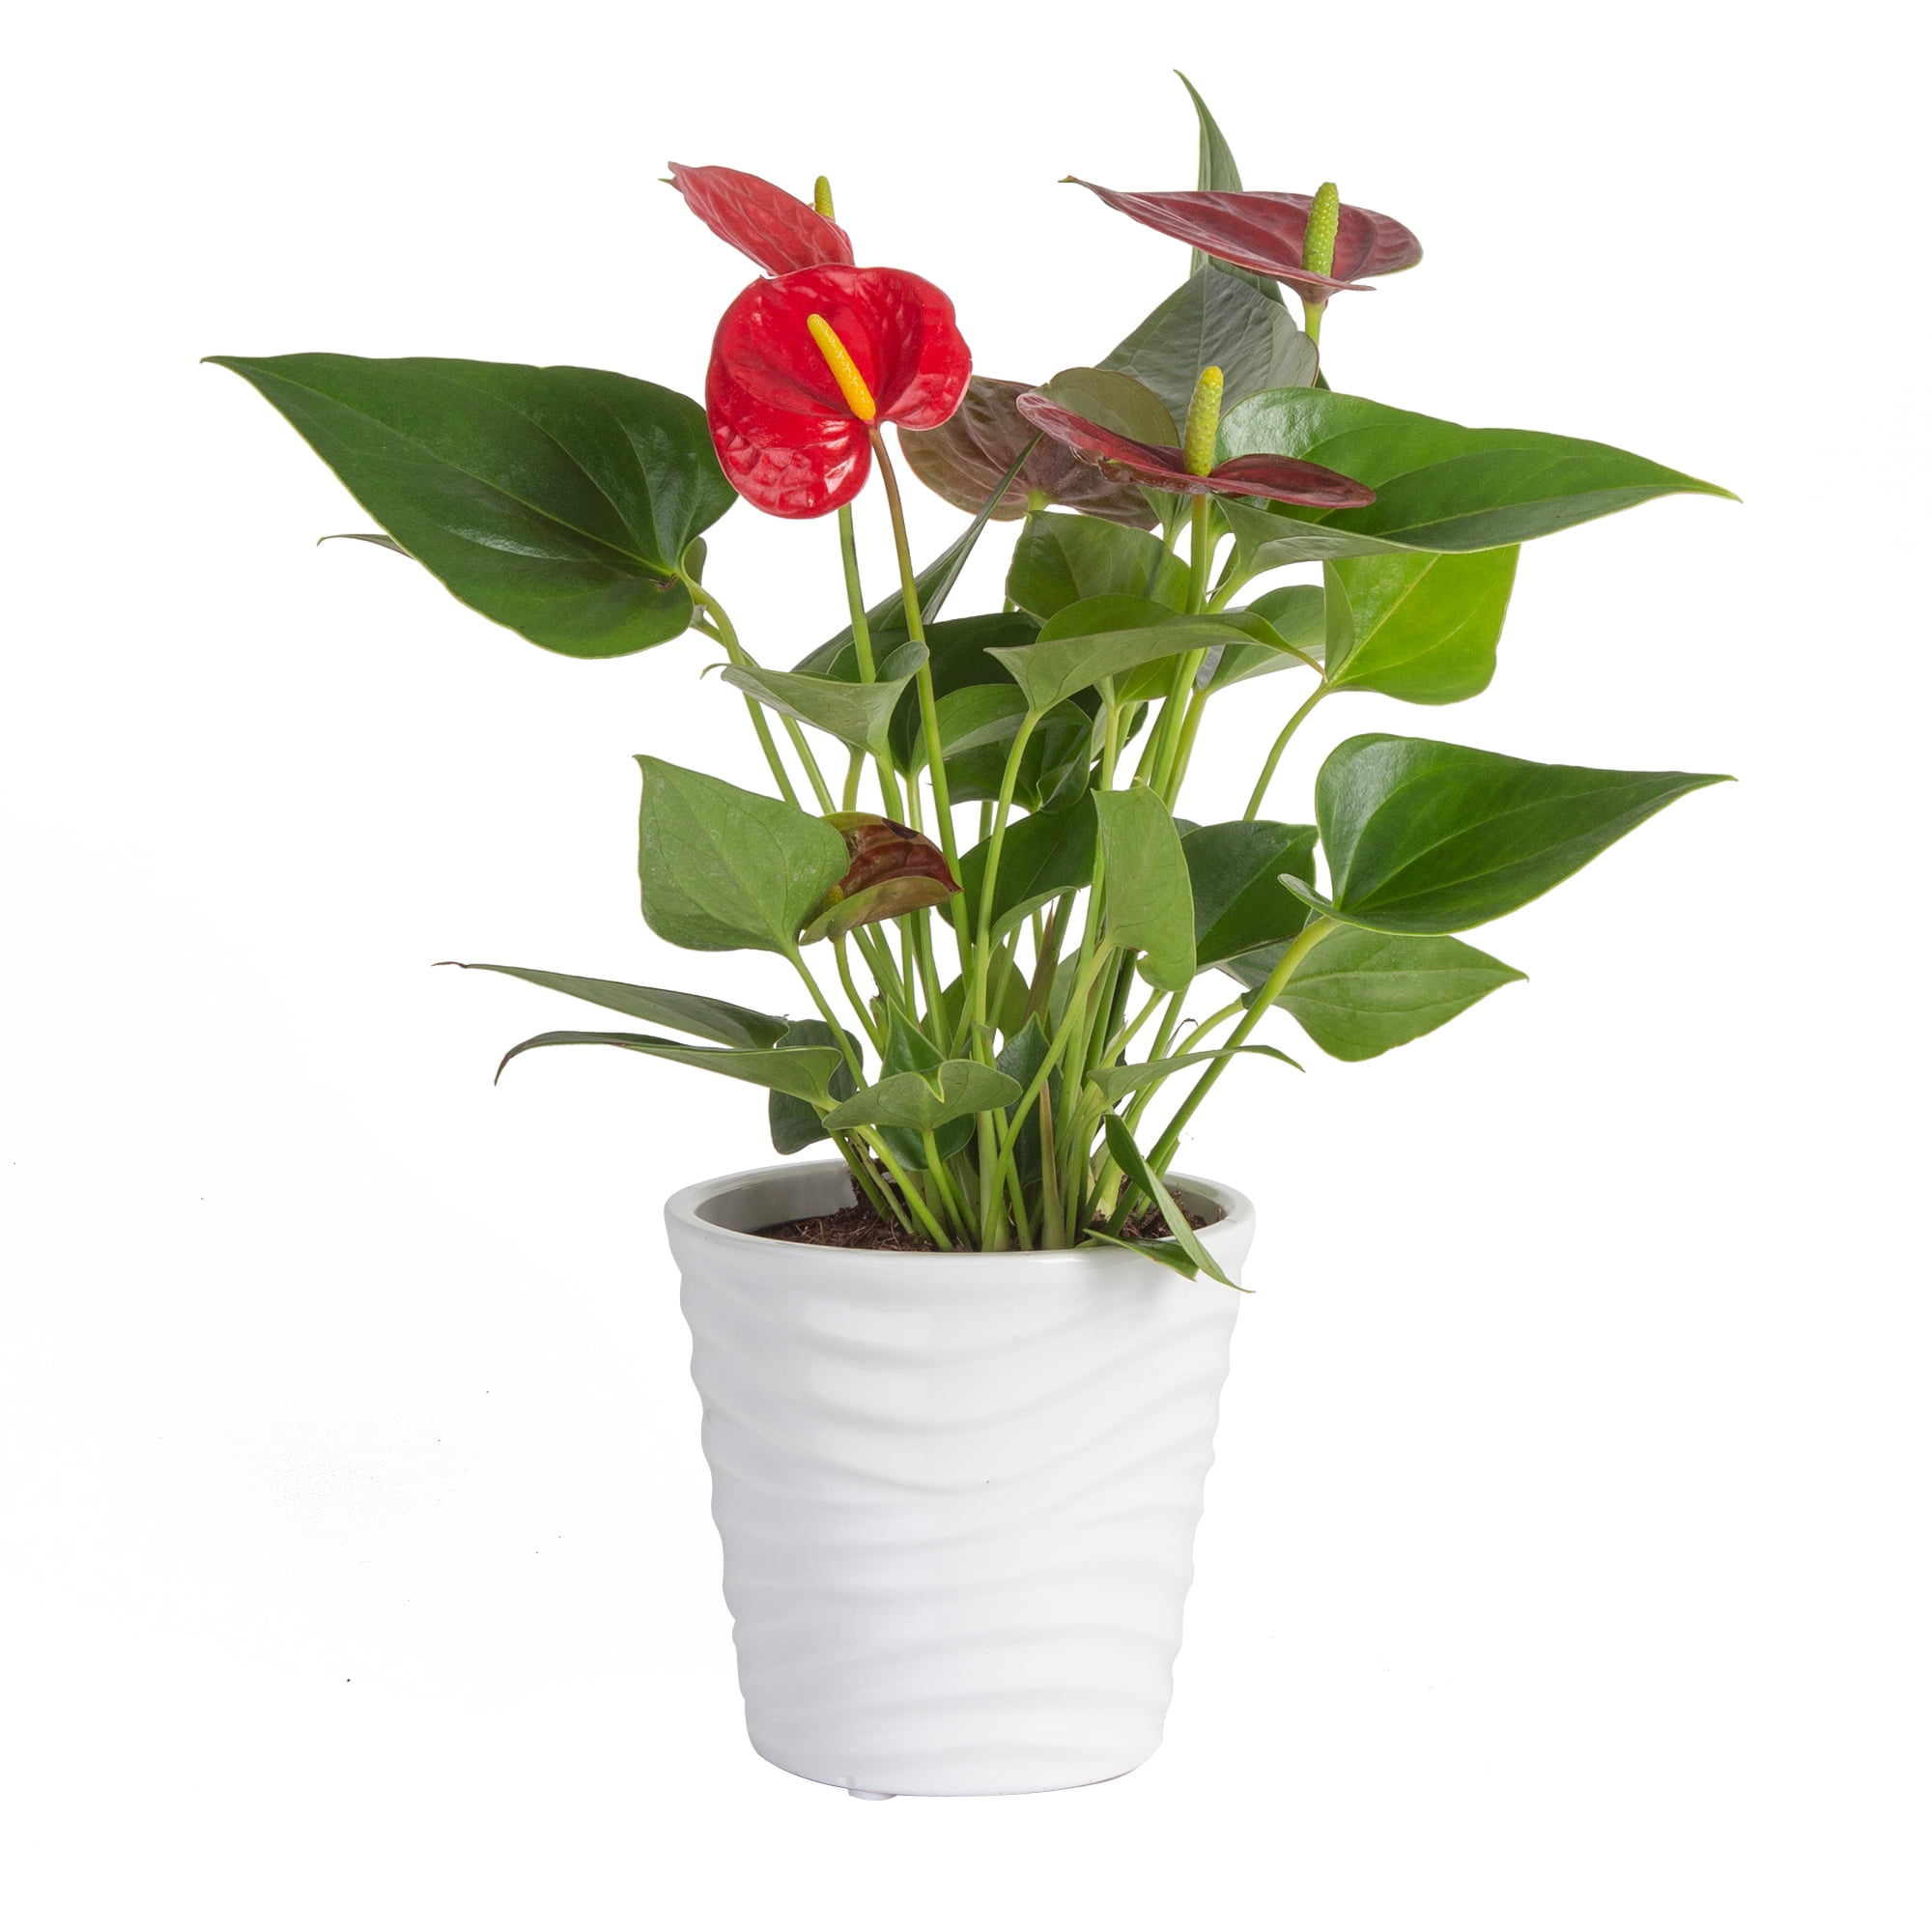 Better Homes & Gardens Live Indoor Red Anthurium Plant in 4in. Pot